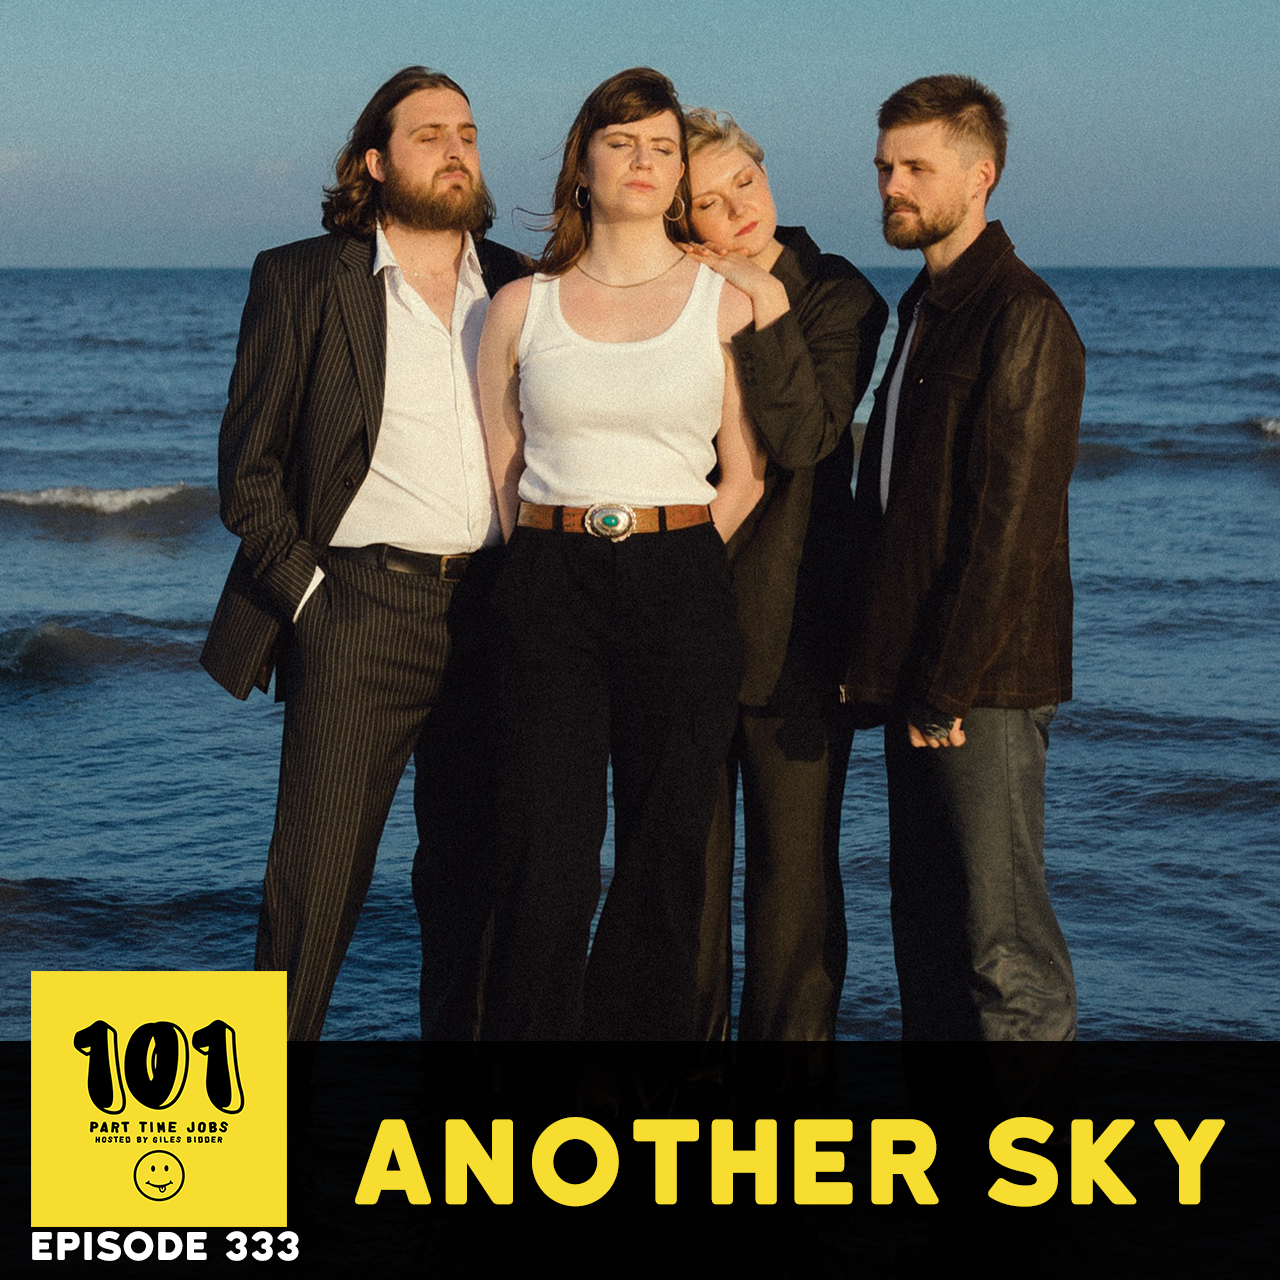 Episode Another Sky - "I've put everything into this band"